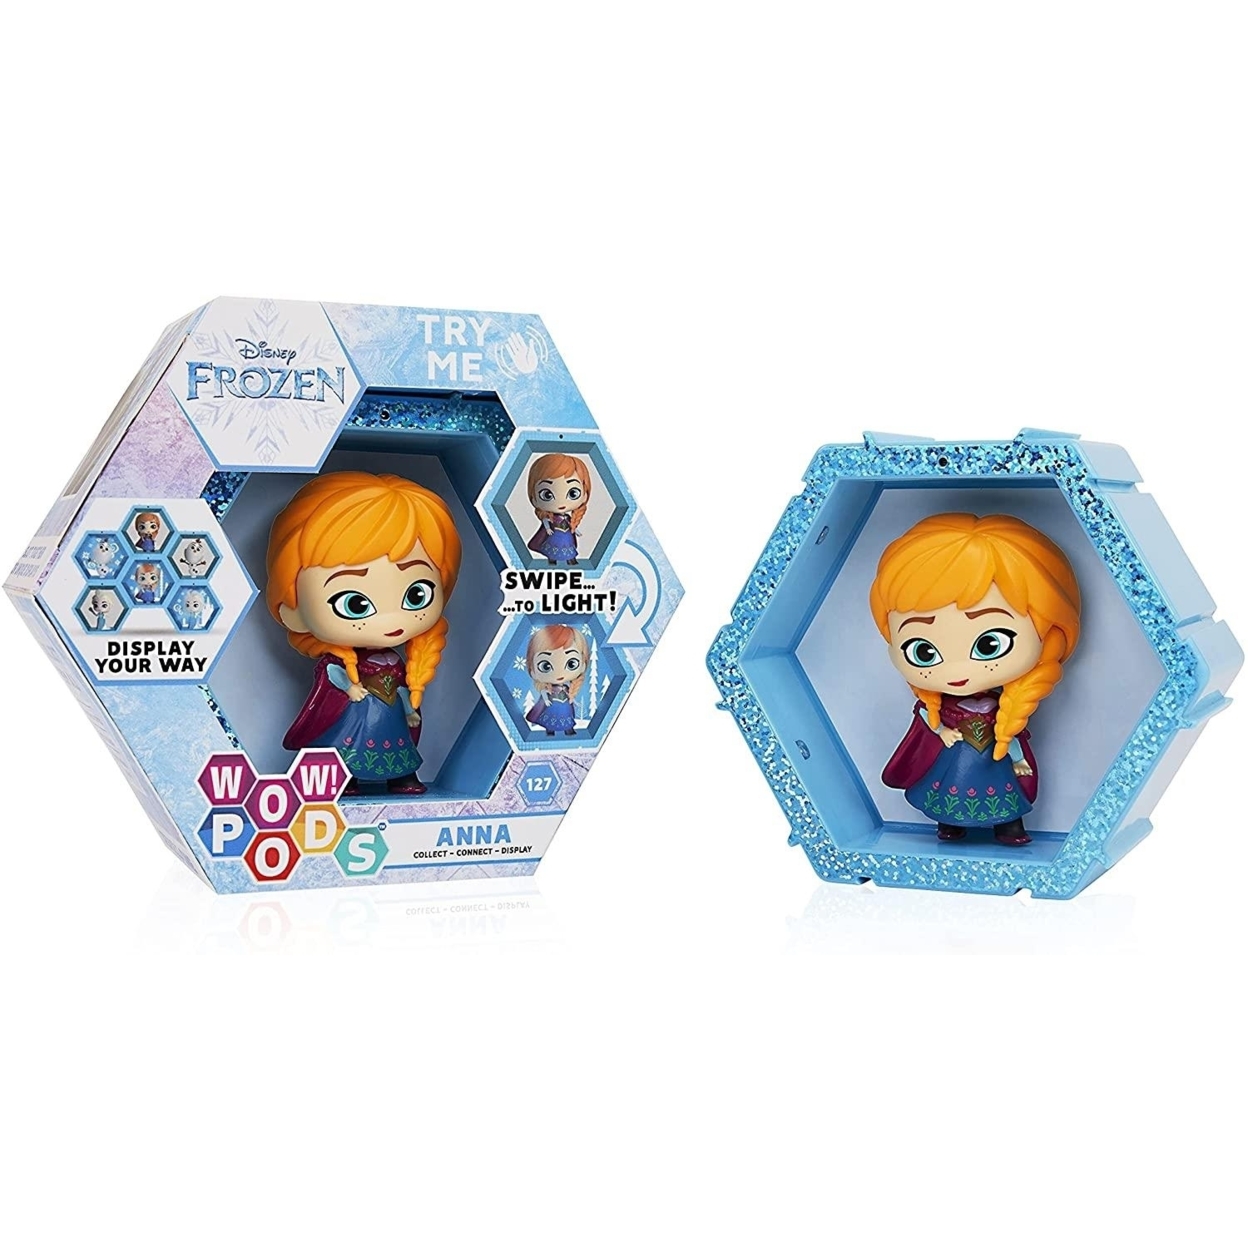 WOW Pods Disney Frozen Anna Princess Swipe To Light Connect Light-Up Figure Collectible